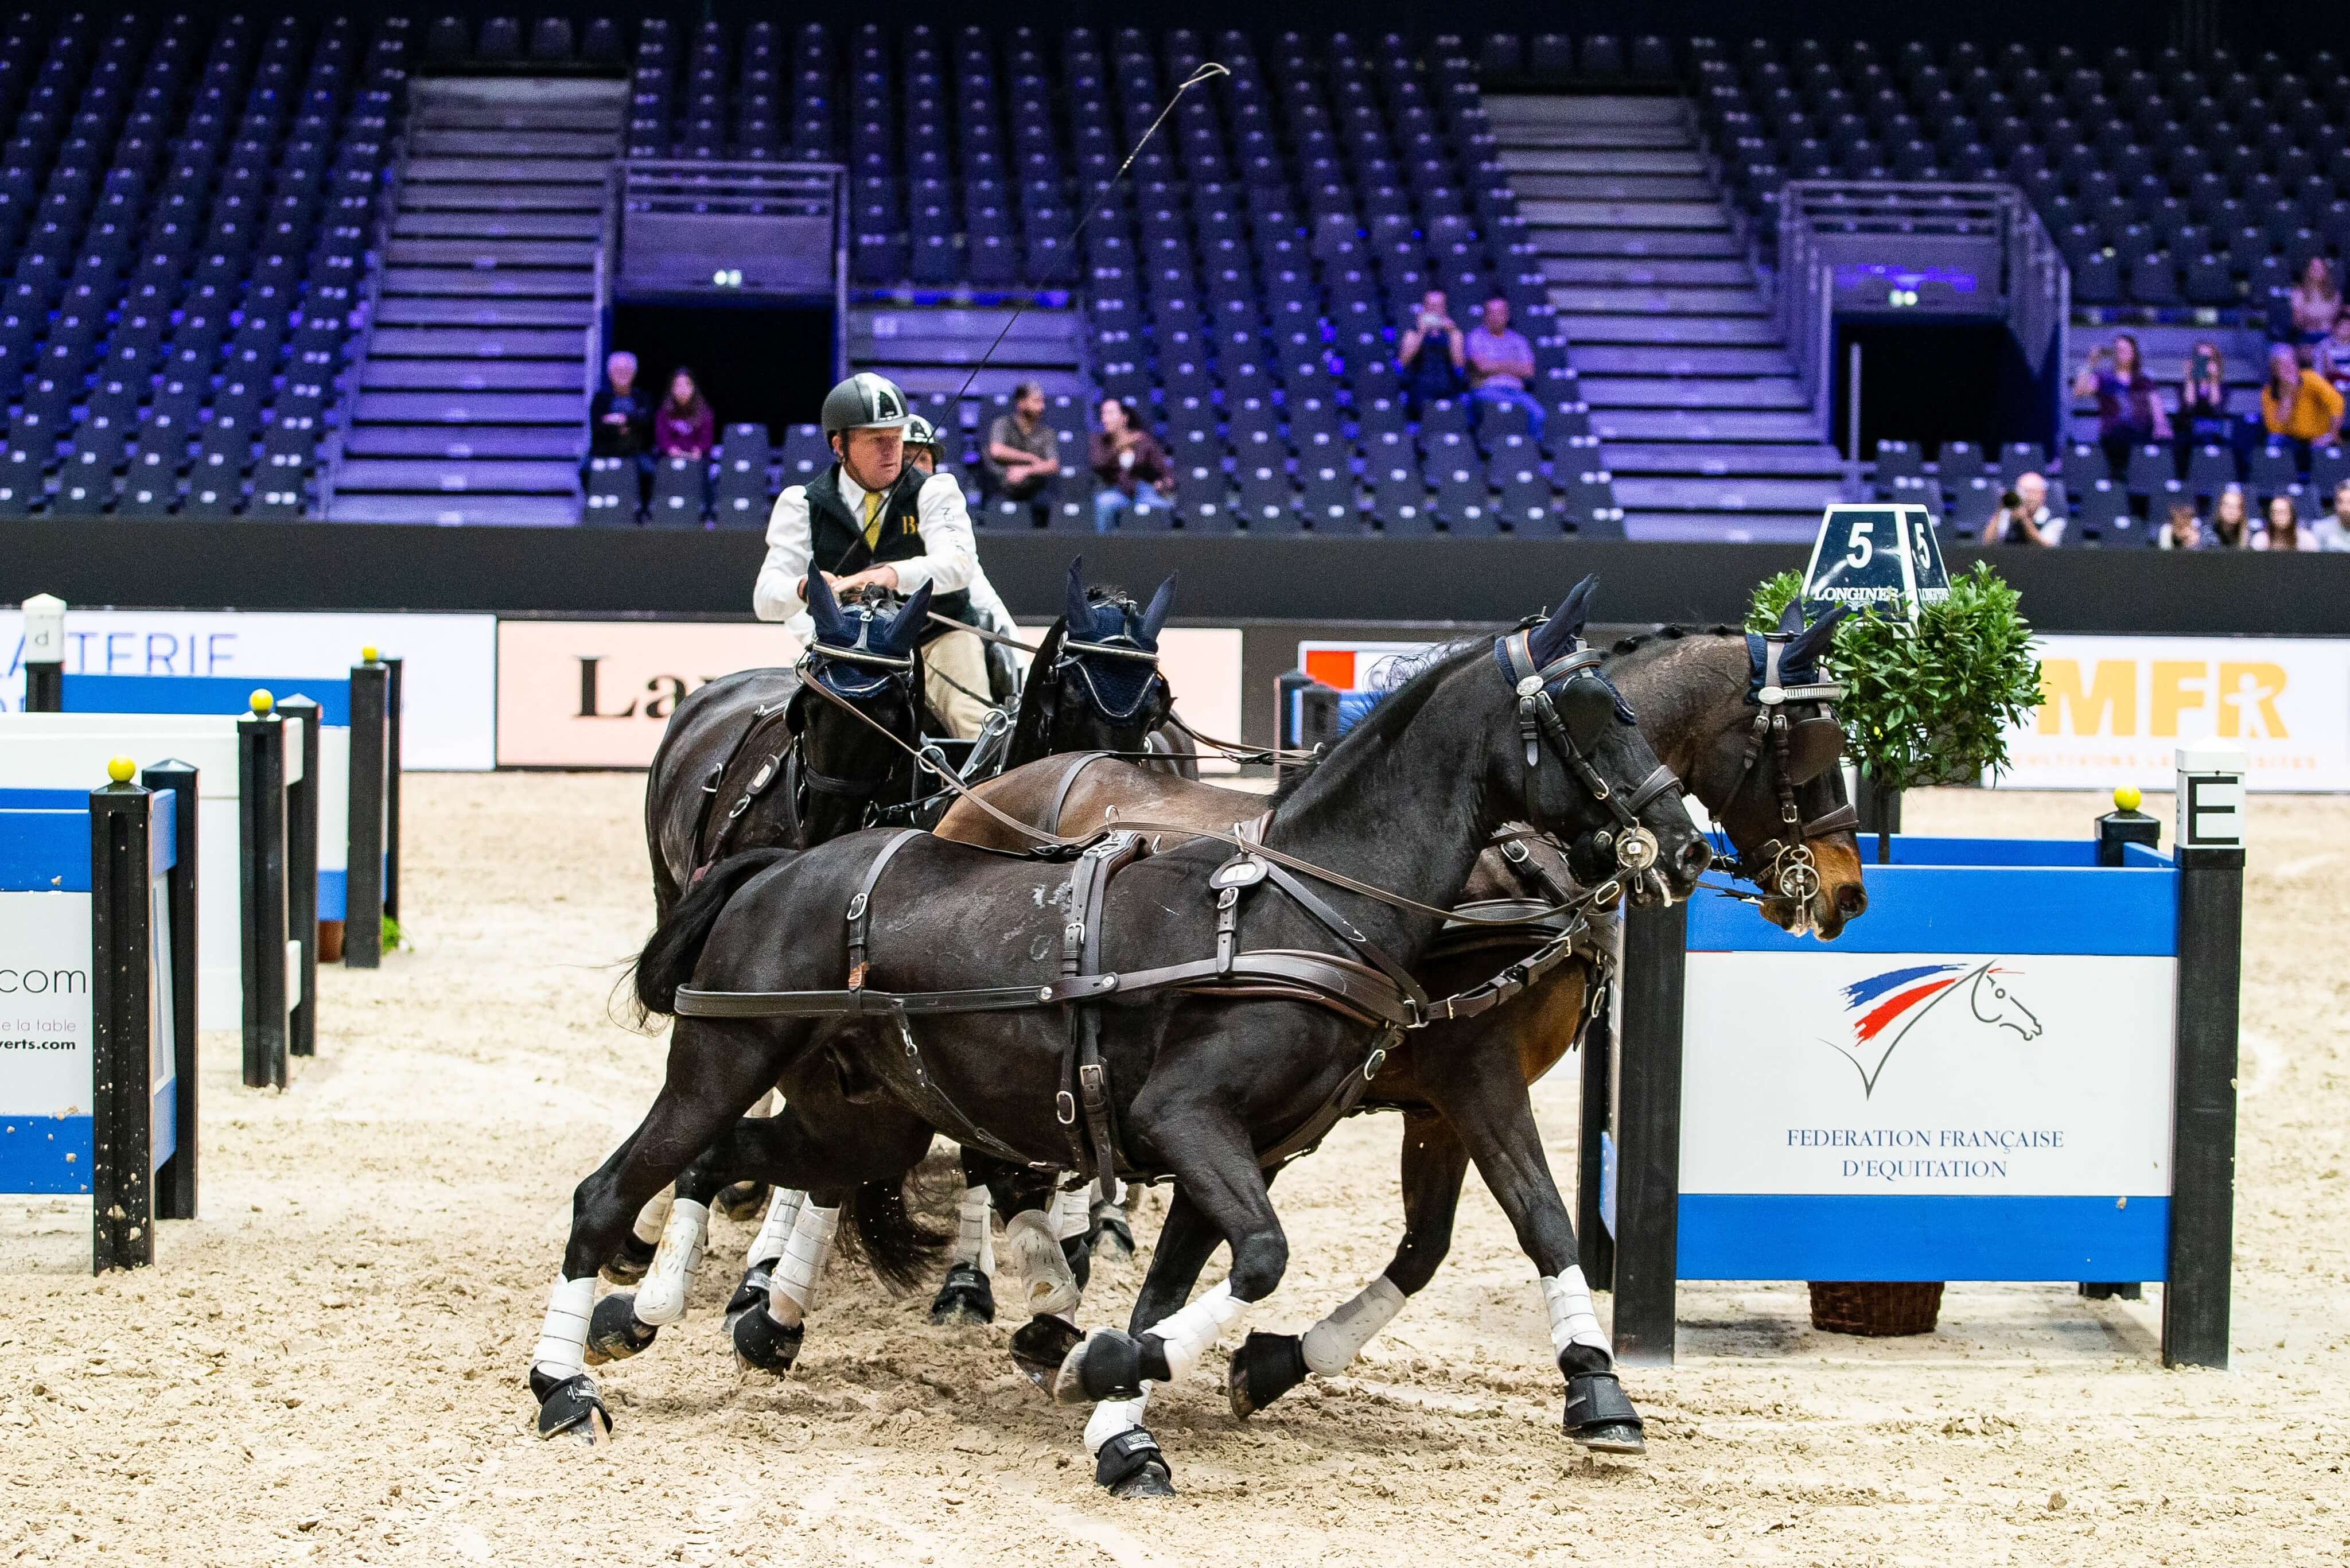 Boyd Exell's march to victory continues in FEI World Cup Driving